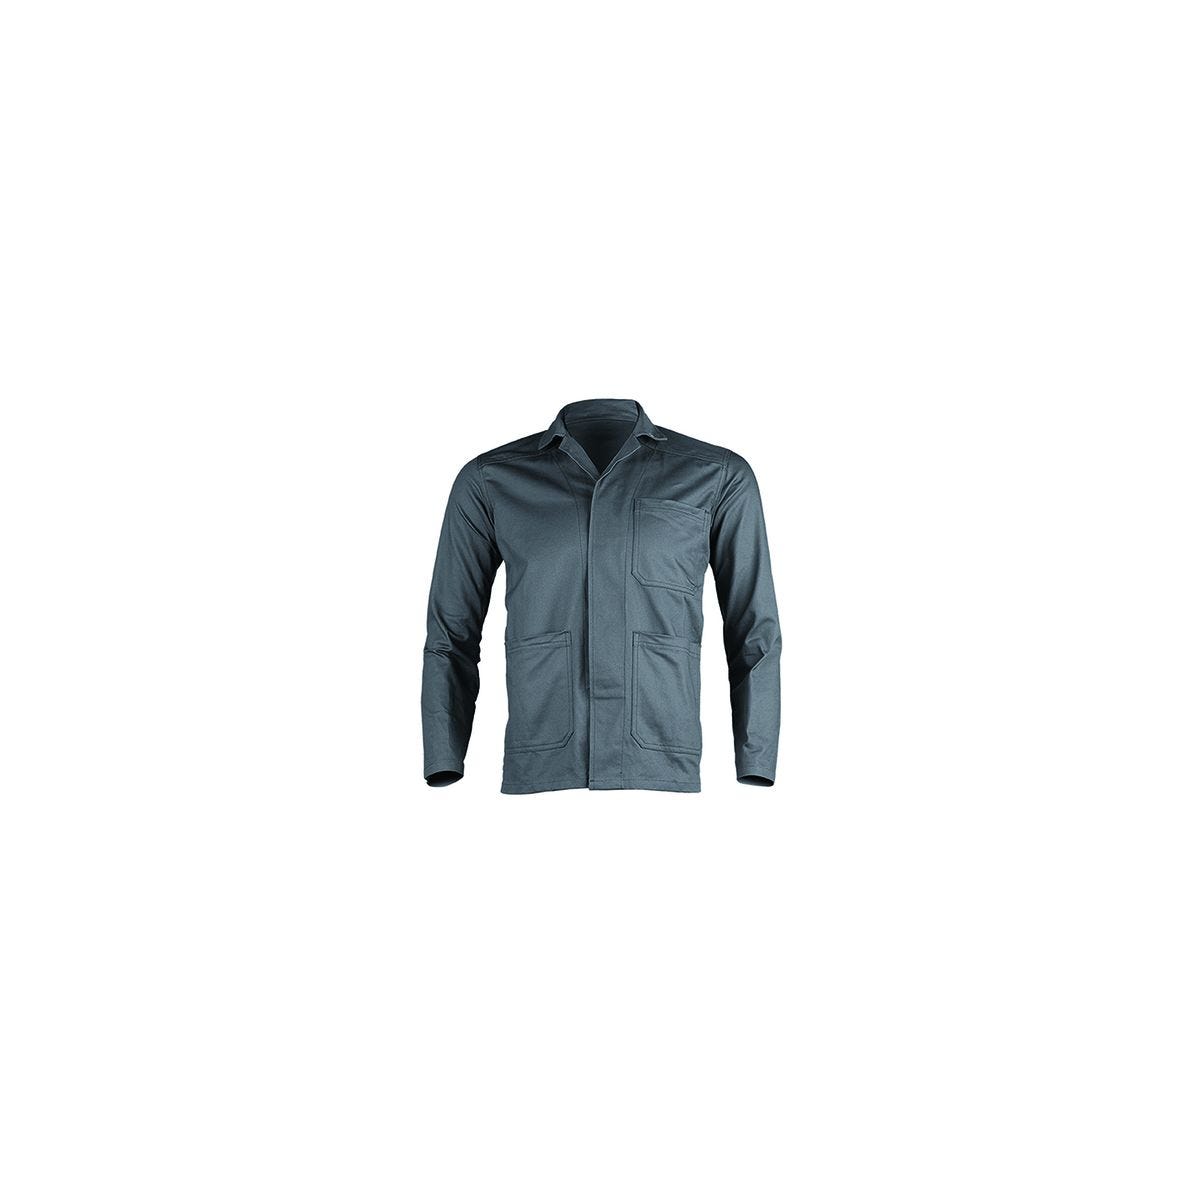 INDUSTRY Veste, grise, 65%PES/35%PES, 245 g/m² - COVERGUARD - Taille S 0